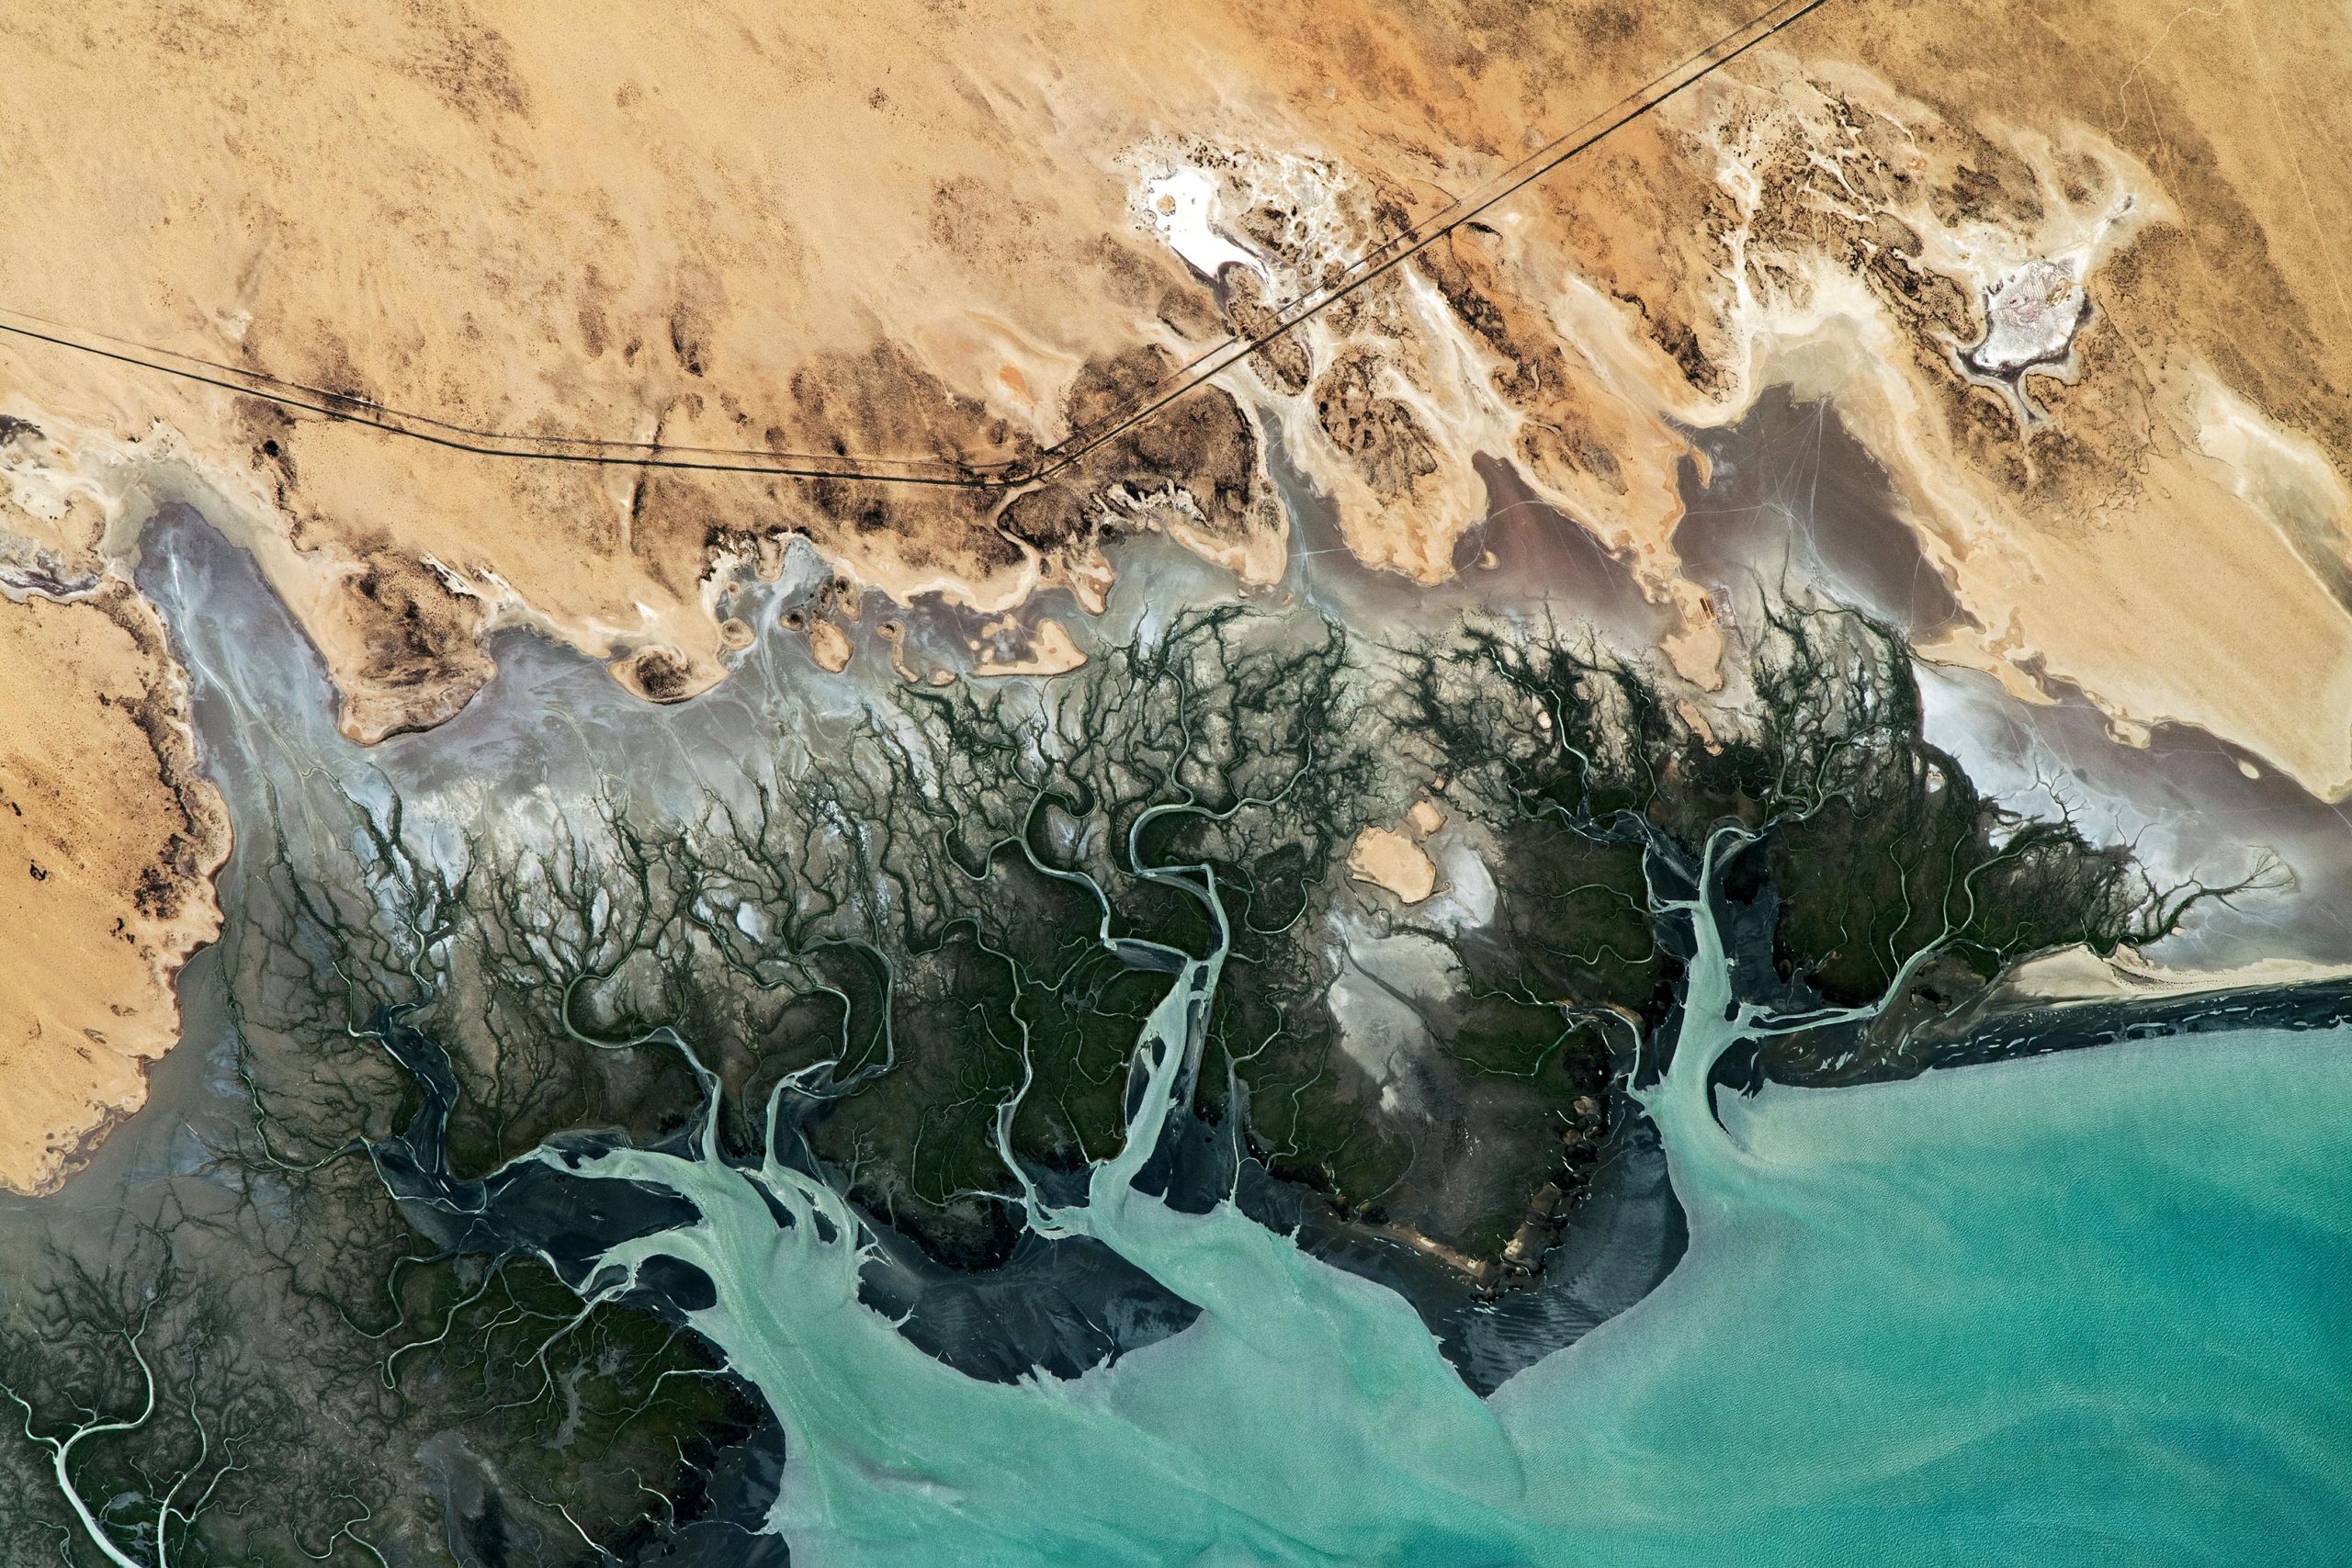 Wetlands of Adair Bay – Stunning Photo Captured by Space Station Astronaut | Science